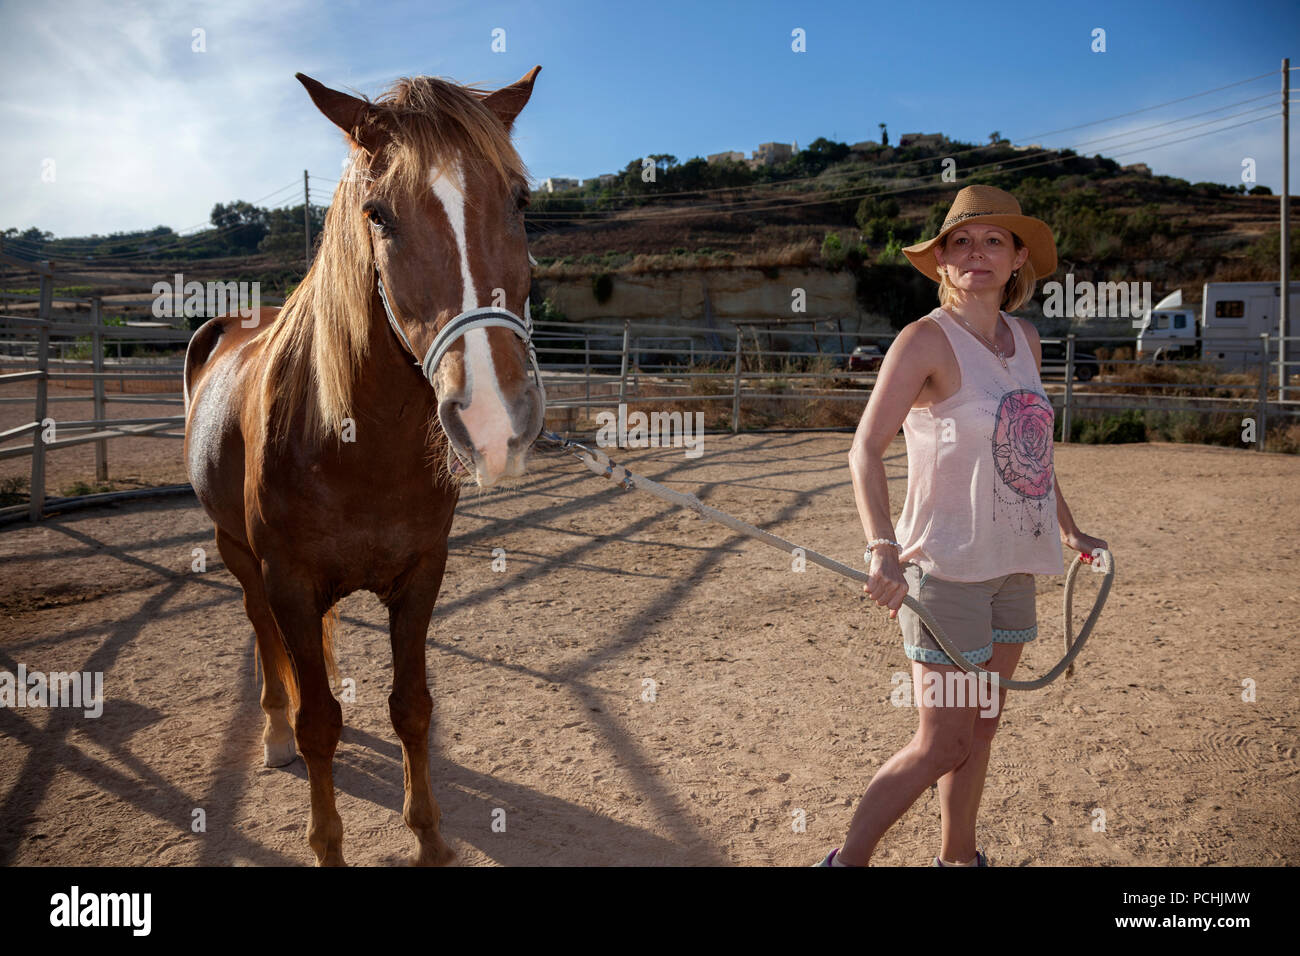 A visitor at a horse-farm practising the handling of horses and horsemanship. Stock Photo